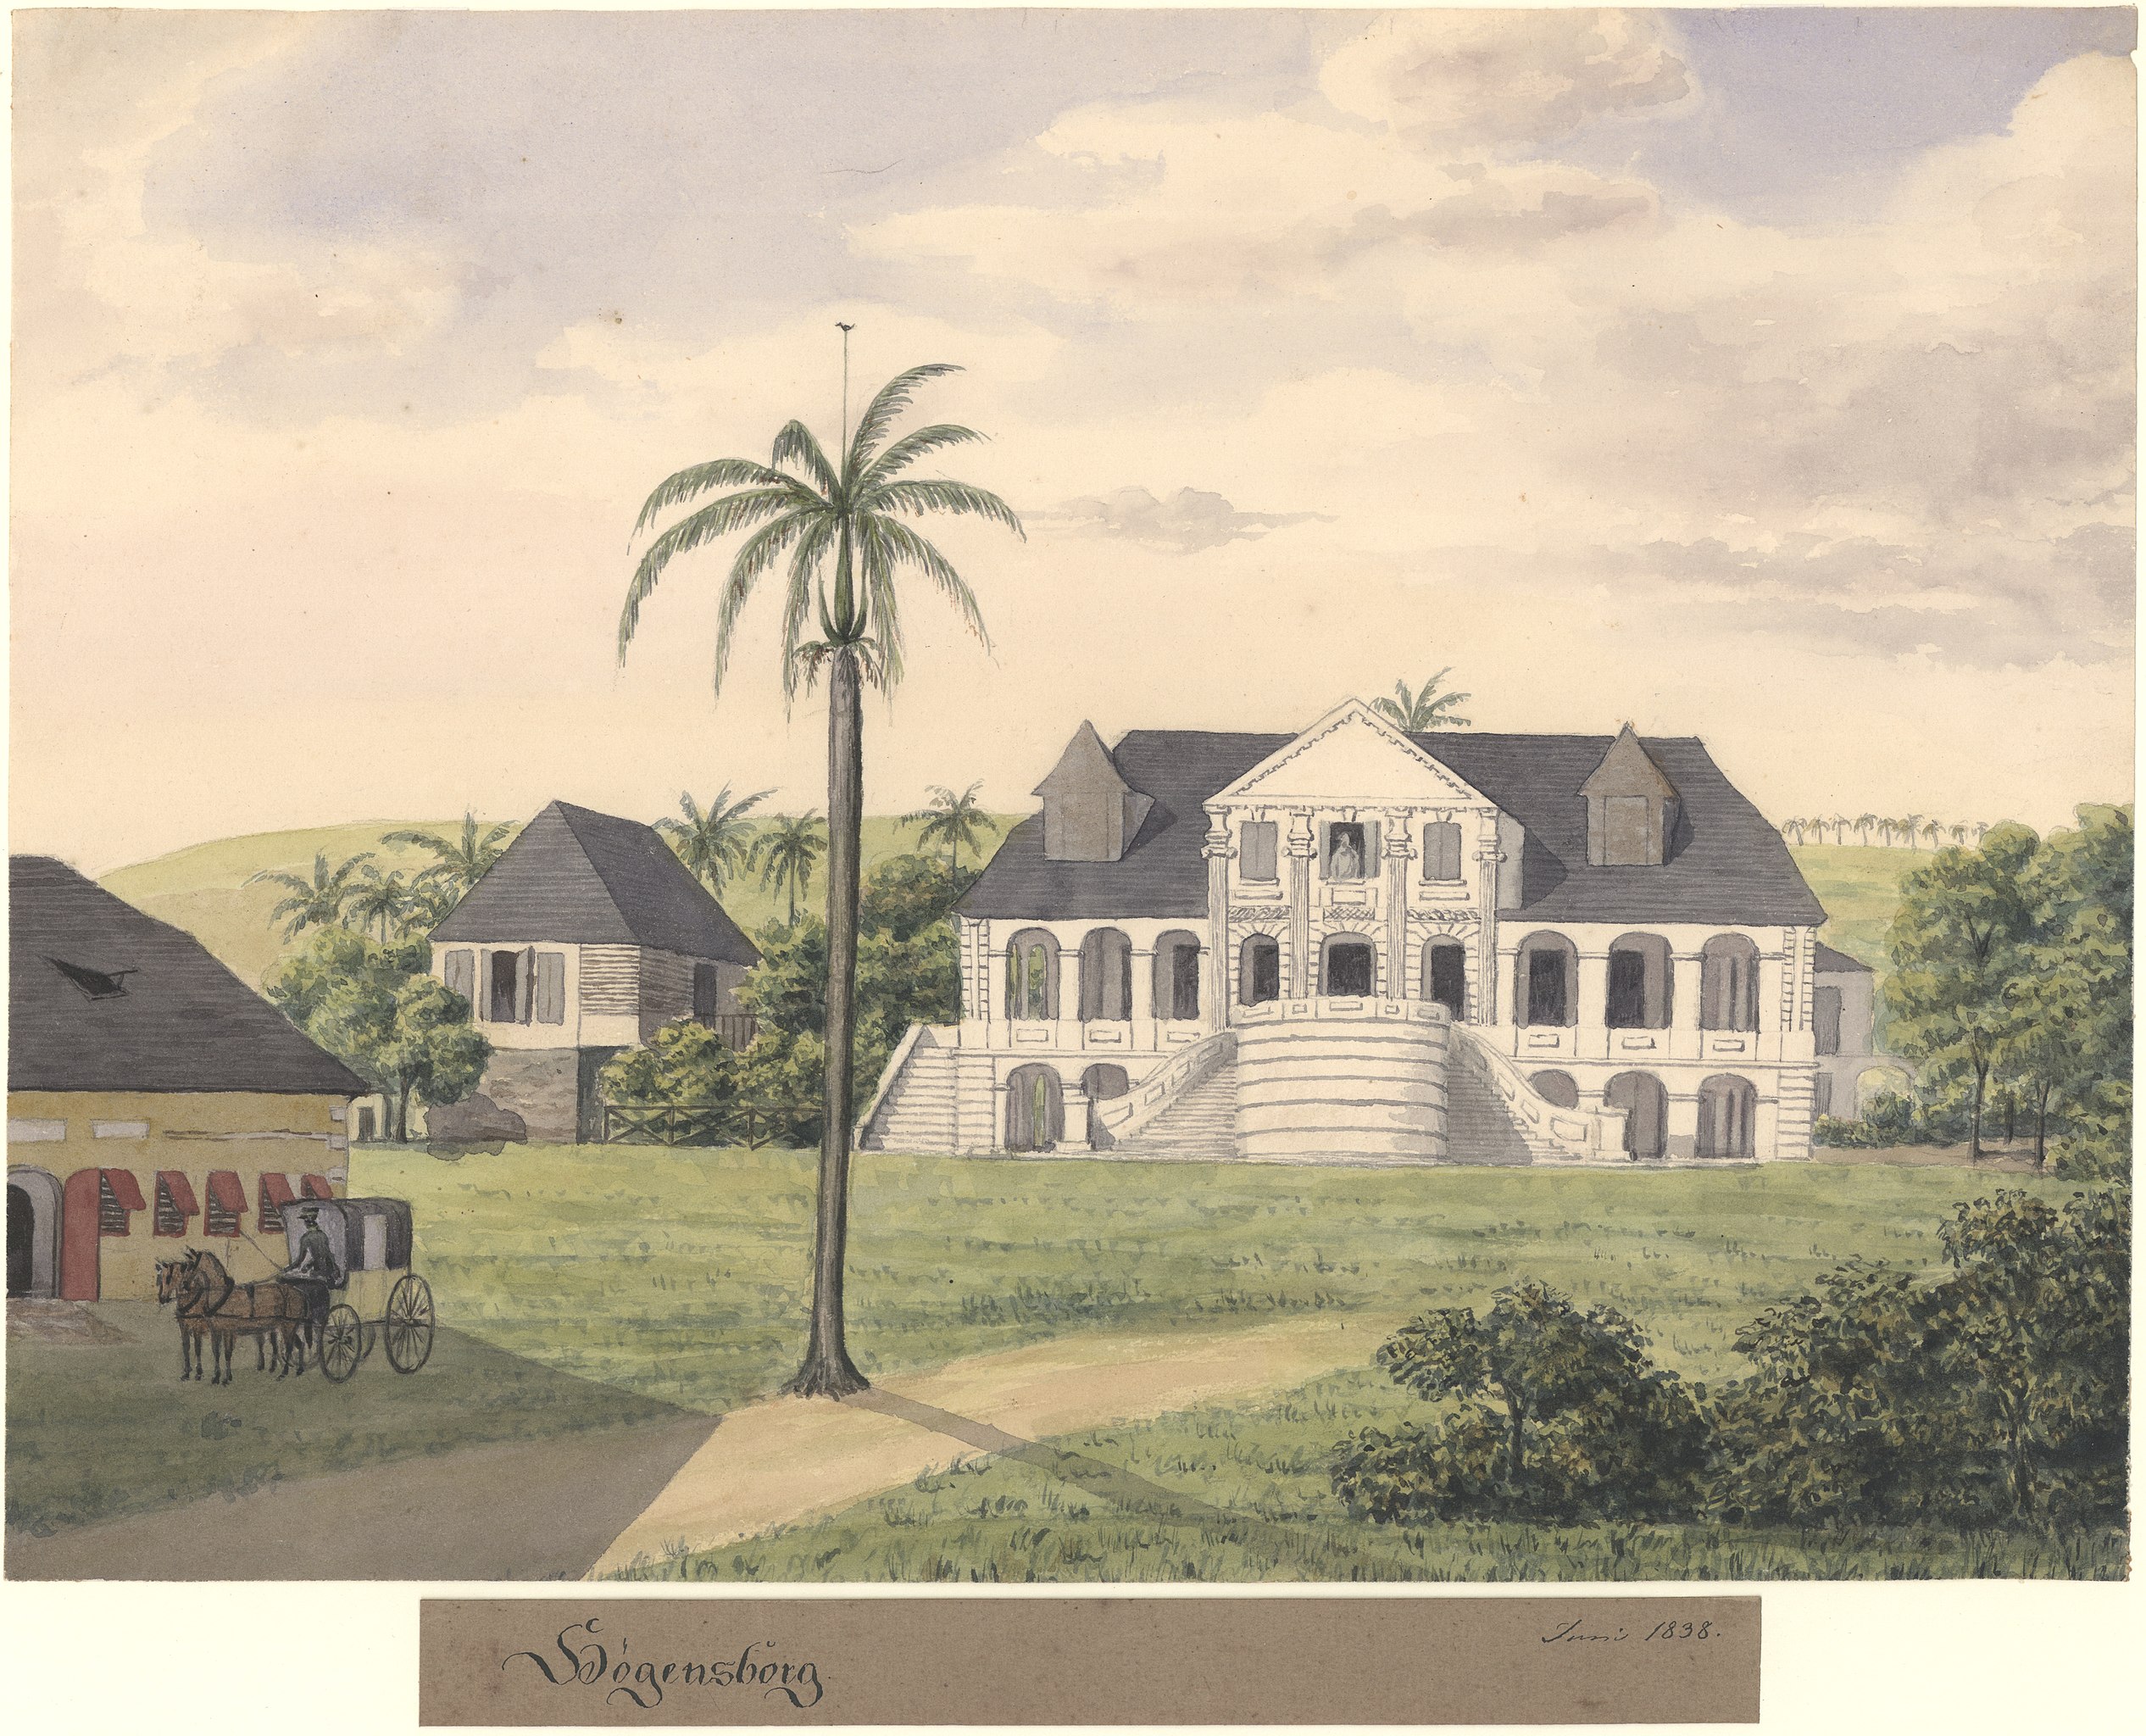 An image of the Hogensborg estate of the late 1700s, today located across from Sunny Isle Shopping Center on St. Croix. It was the residence of a prominent Danish family, known as the Sobotker. Hogensborg is a Danish name, meaning “City of the Hawk.” (Image courtesy Olasee Davis)